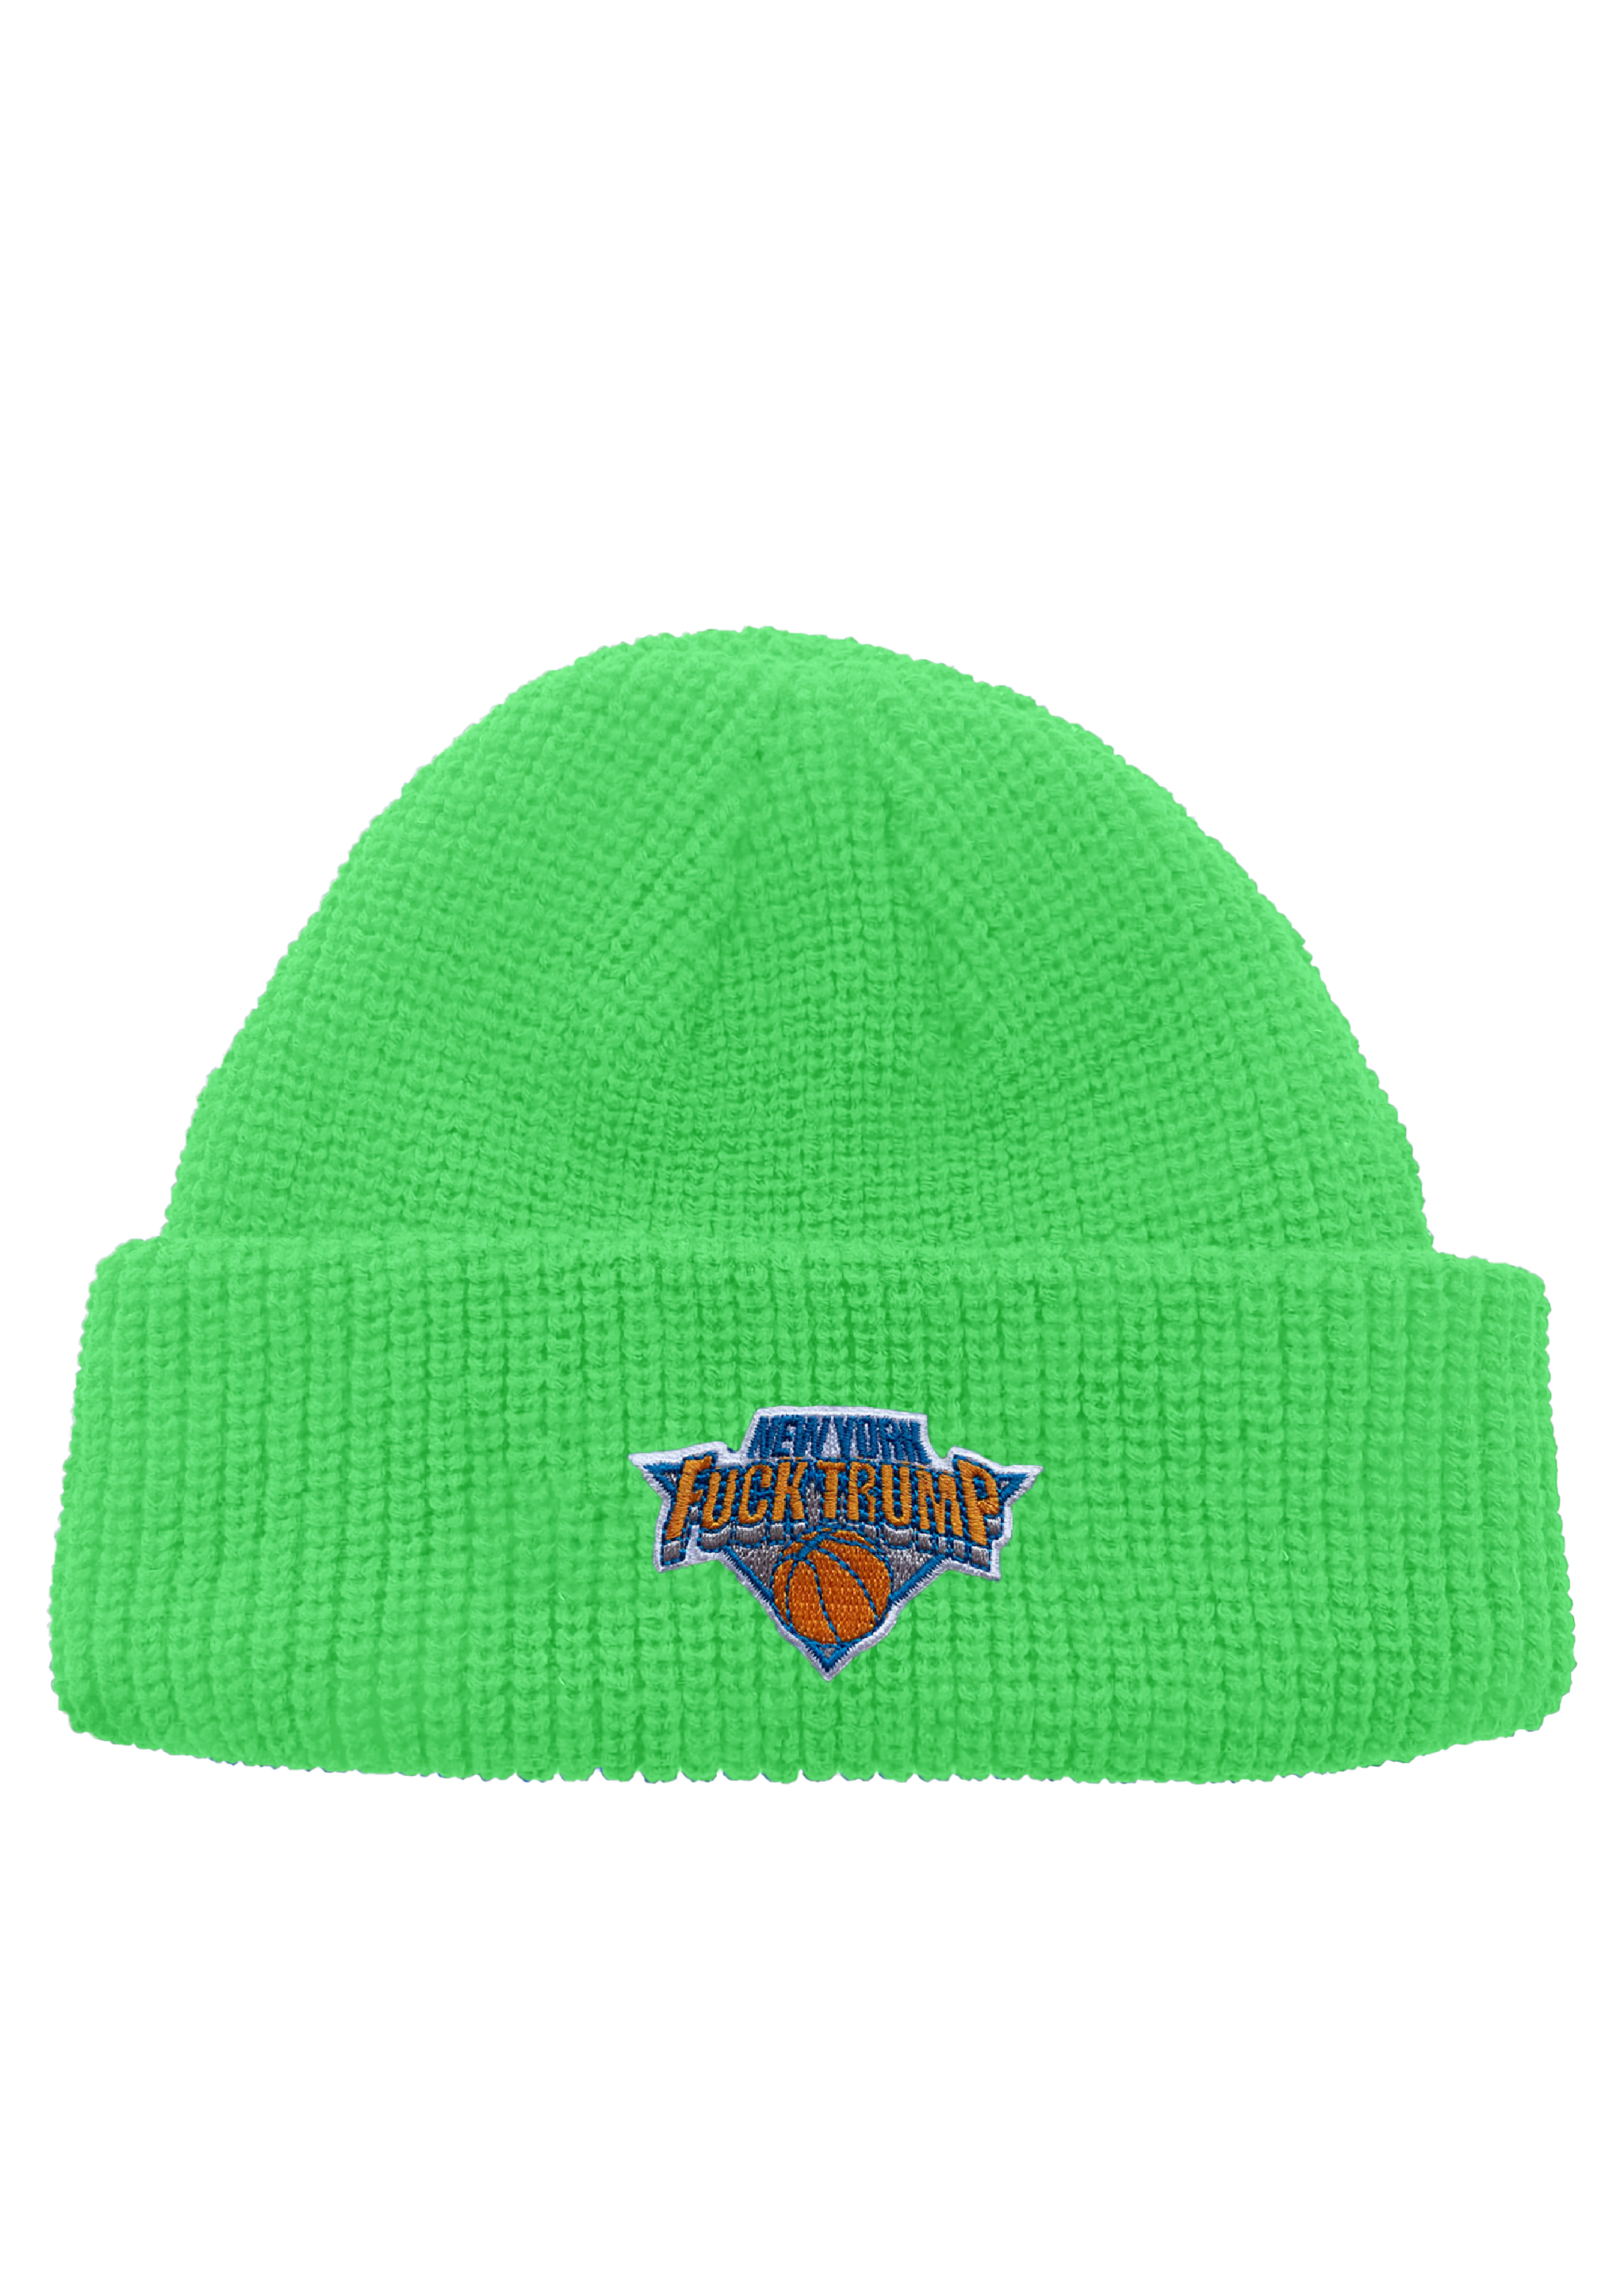 Fuck Trump NY Hoops Patch Neon Color Fisherman Knit Beanie